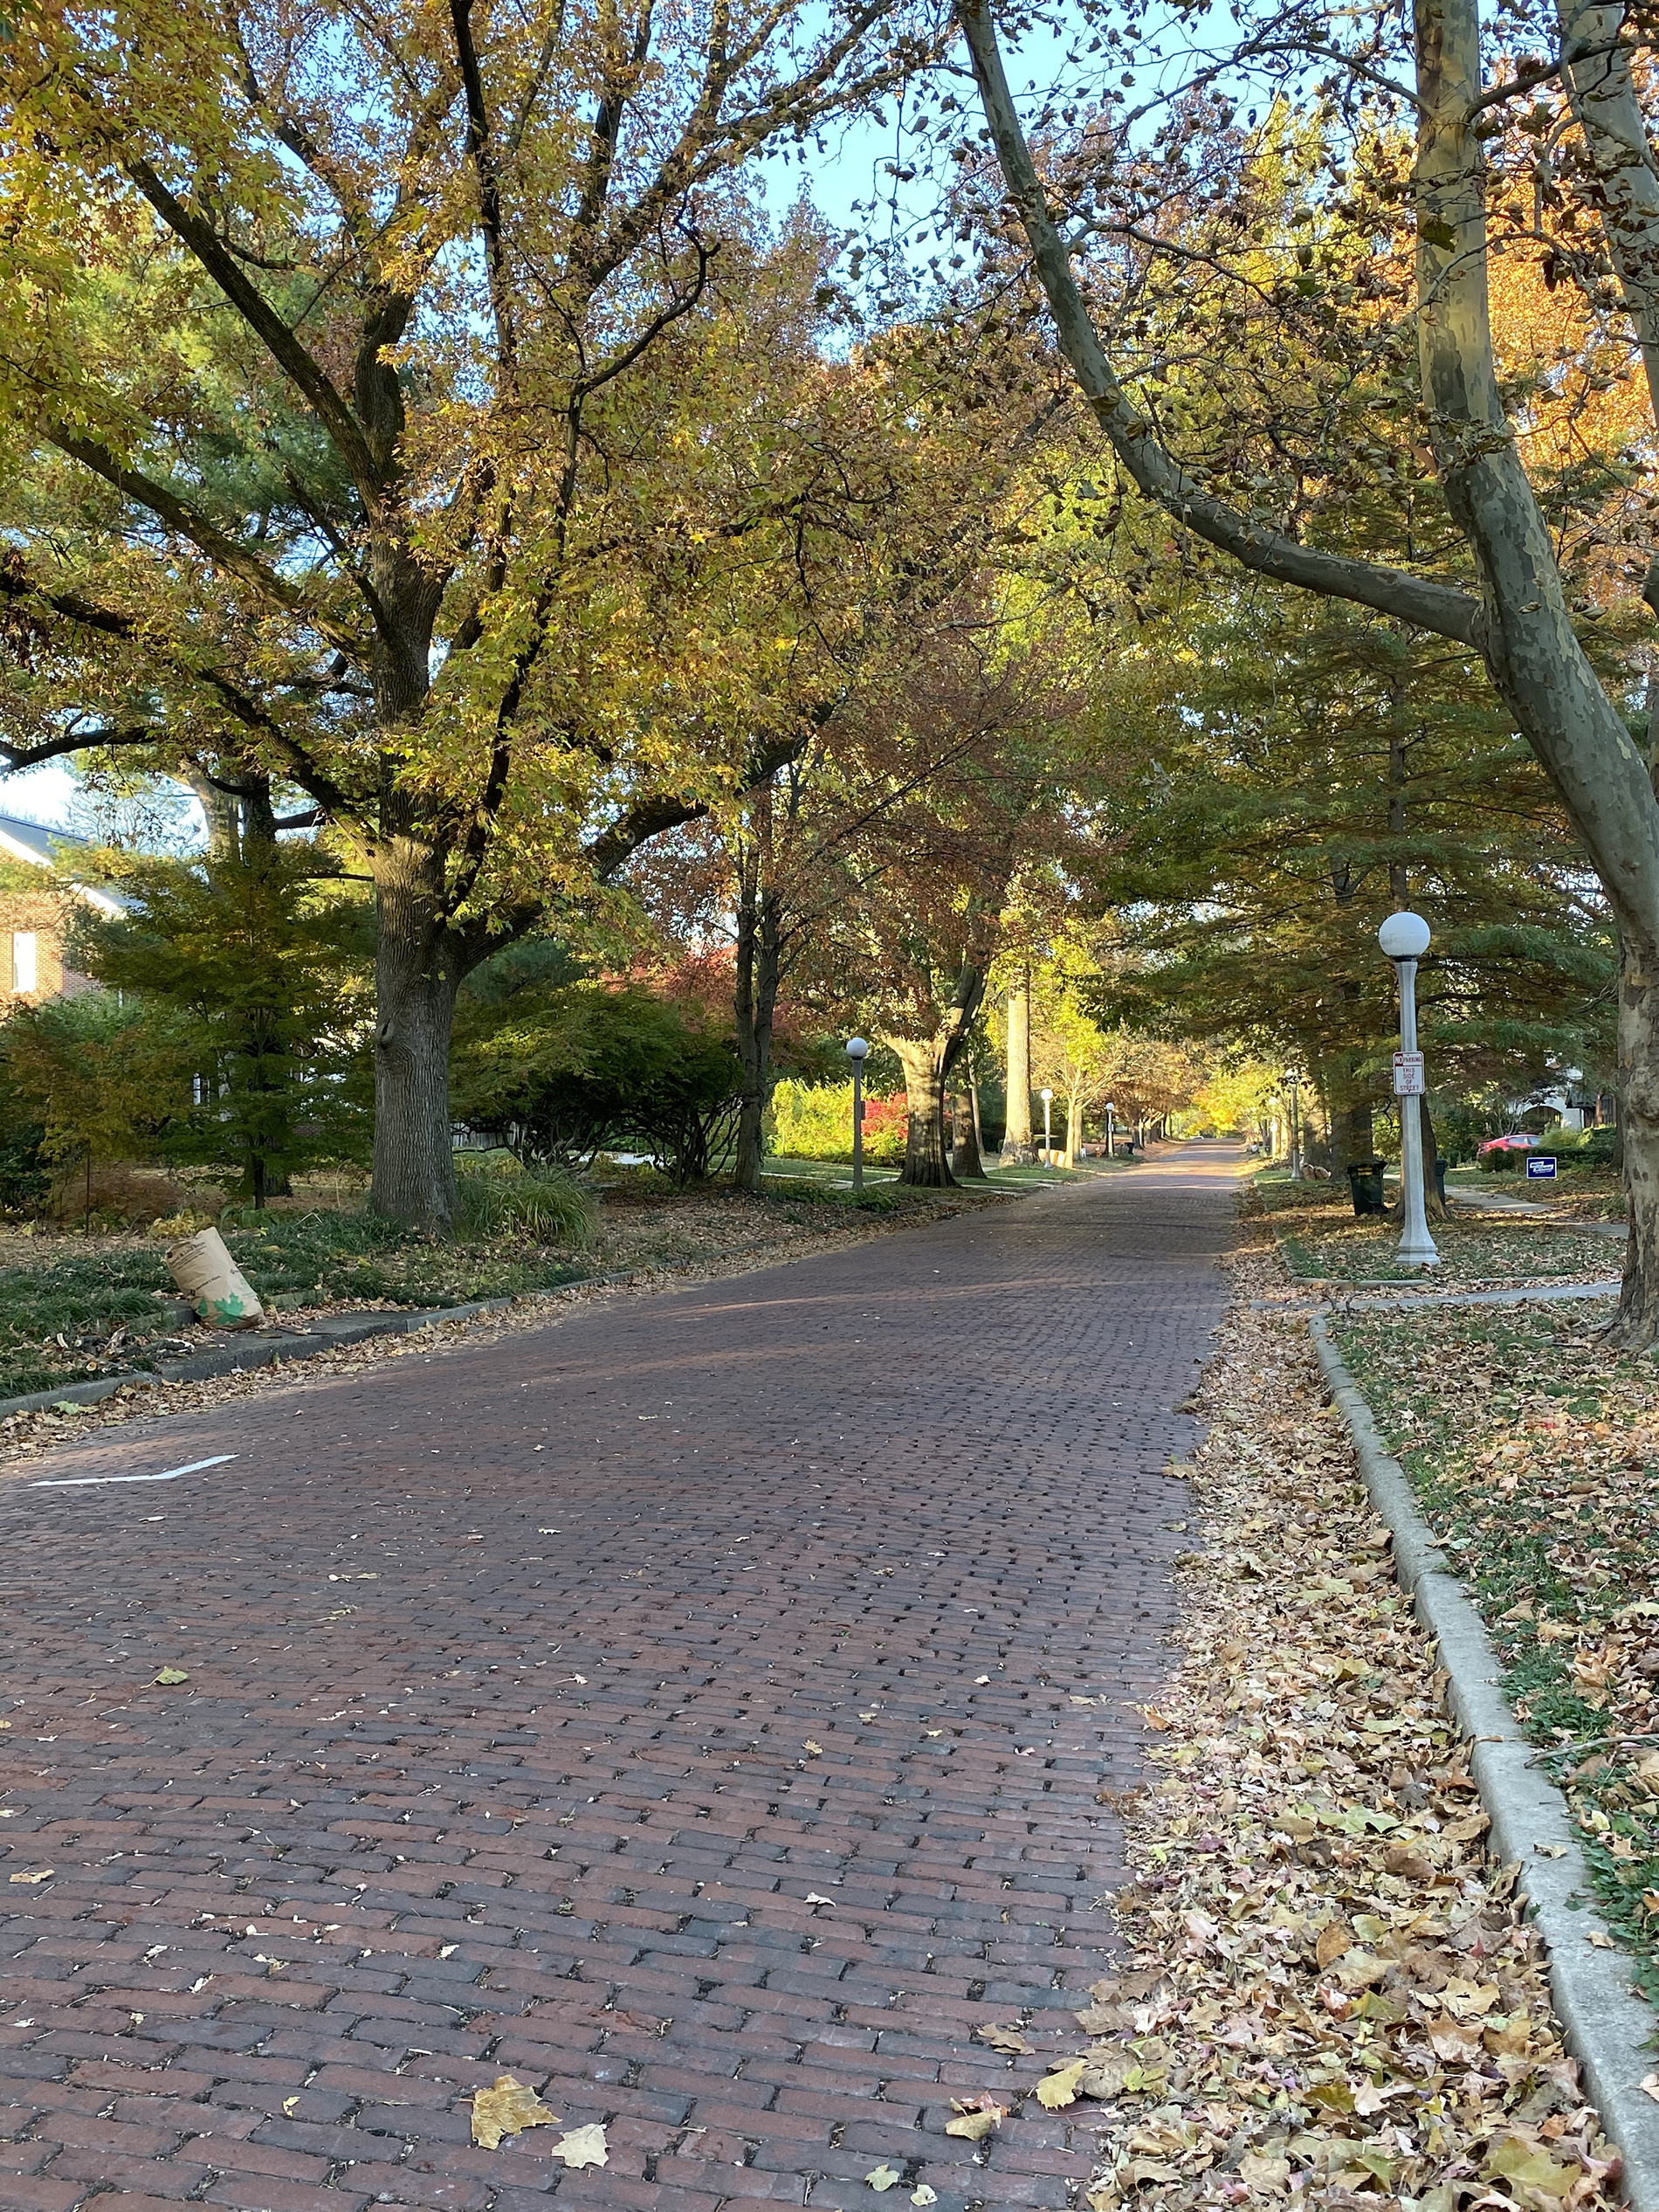 Brick road surrounded by trees